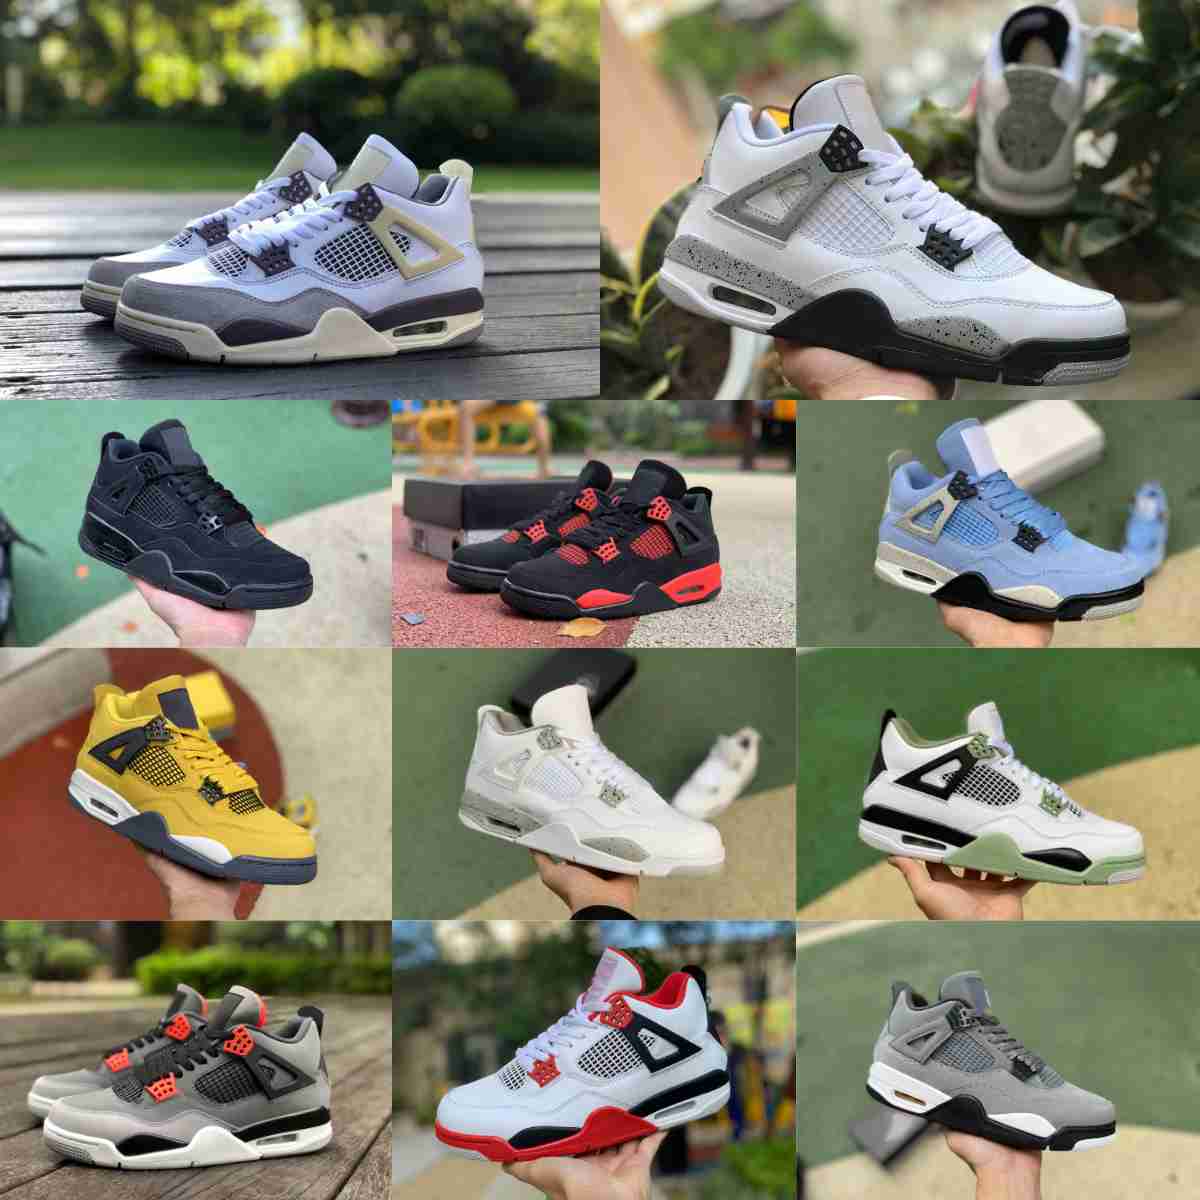 

Jumpman 2023 Seafoam 4 4s Basketball Shoes Mens Women White Cement Money Canyon Purple Cool Grey Bred Craft Photon Dust Military Black Cat Cream Sail Trainer Sneakers